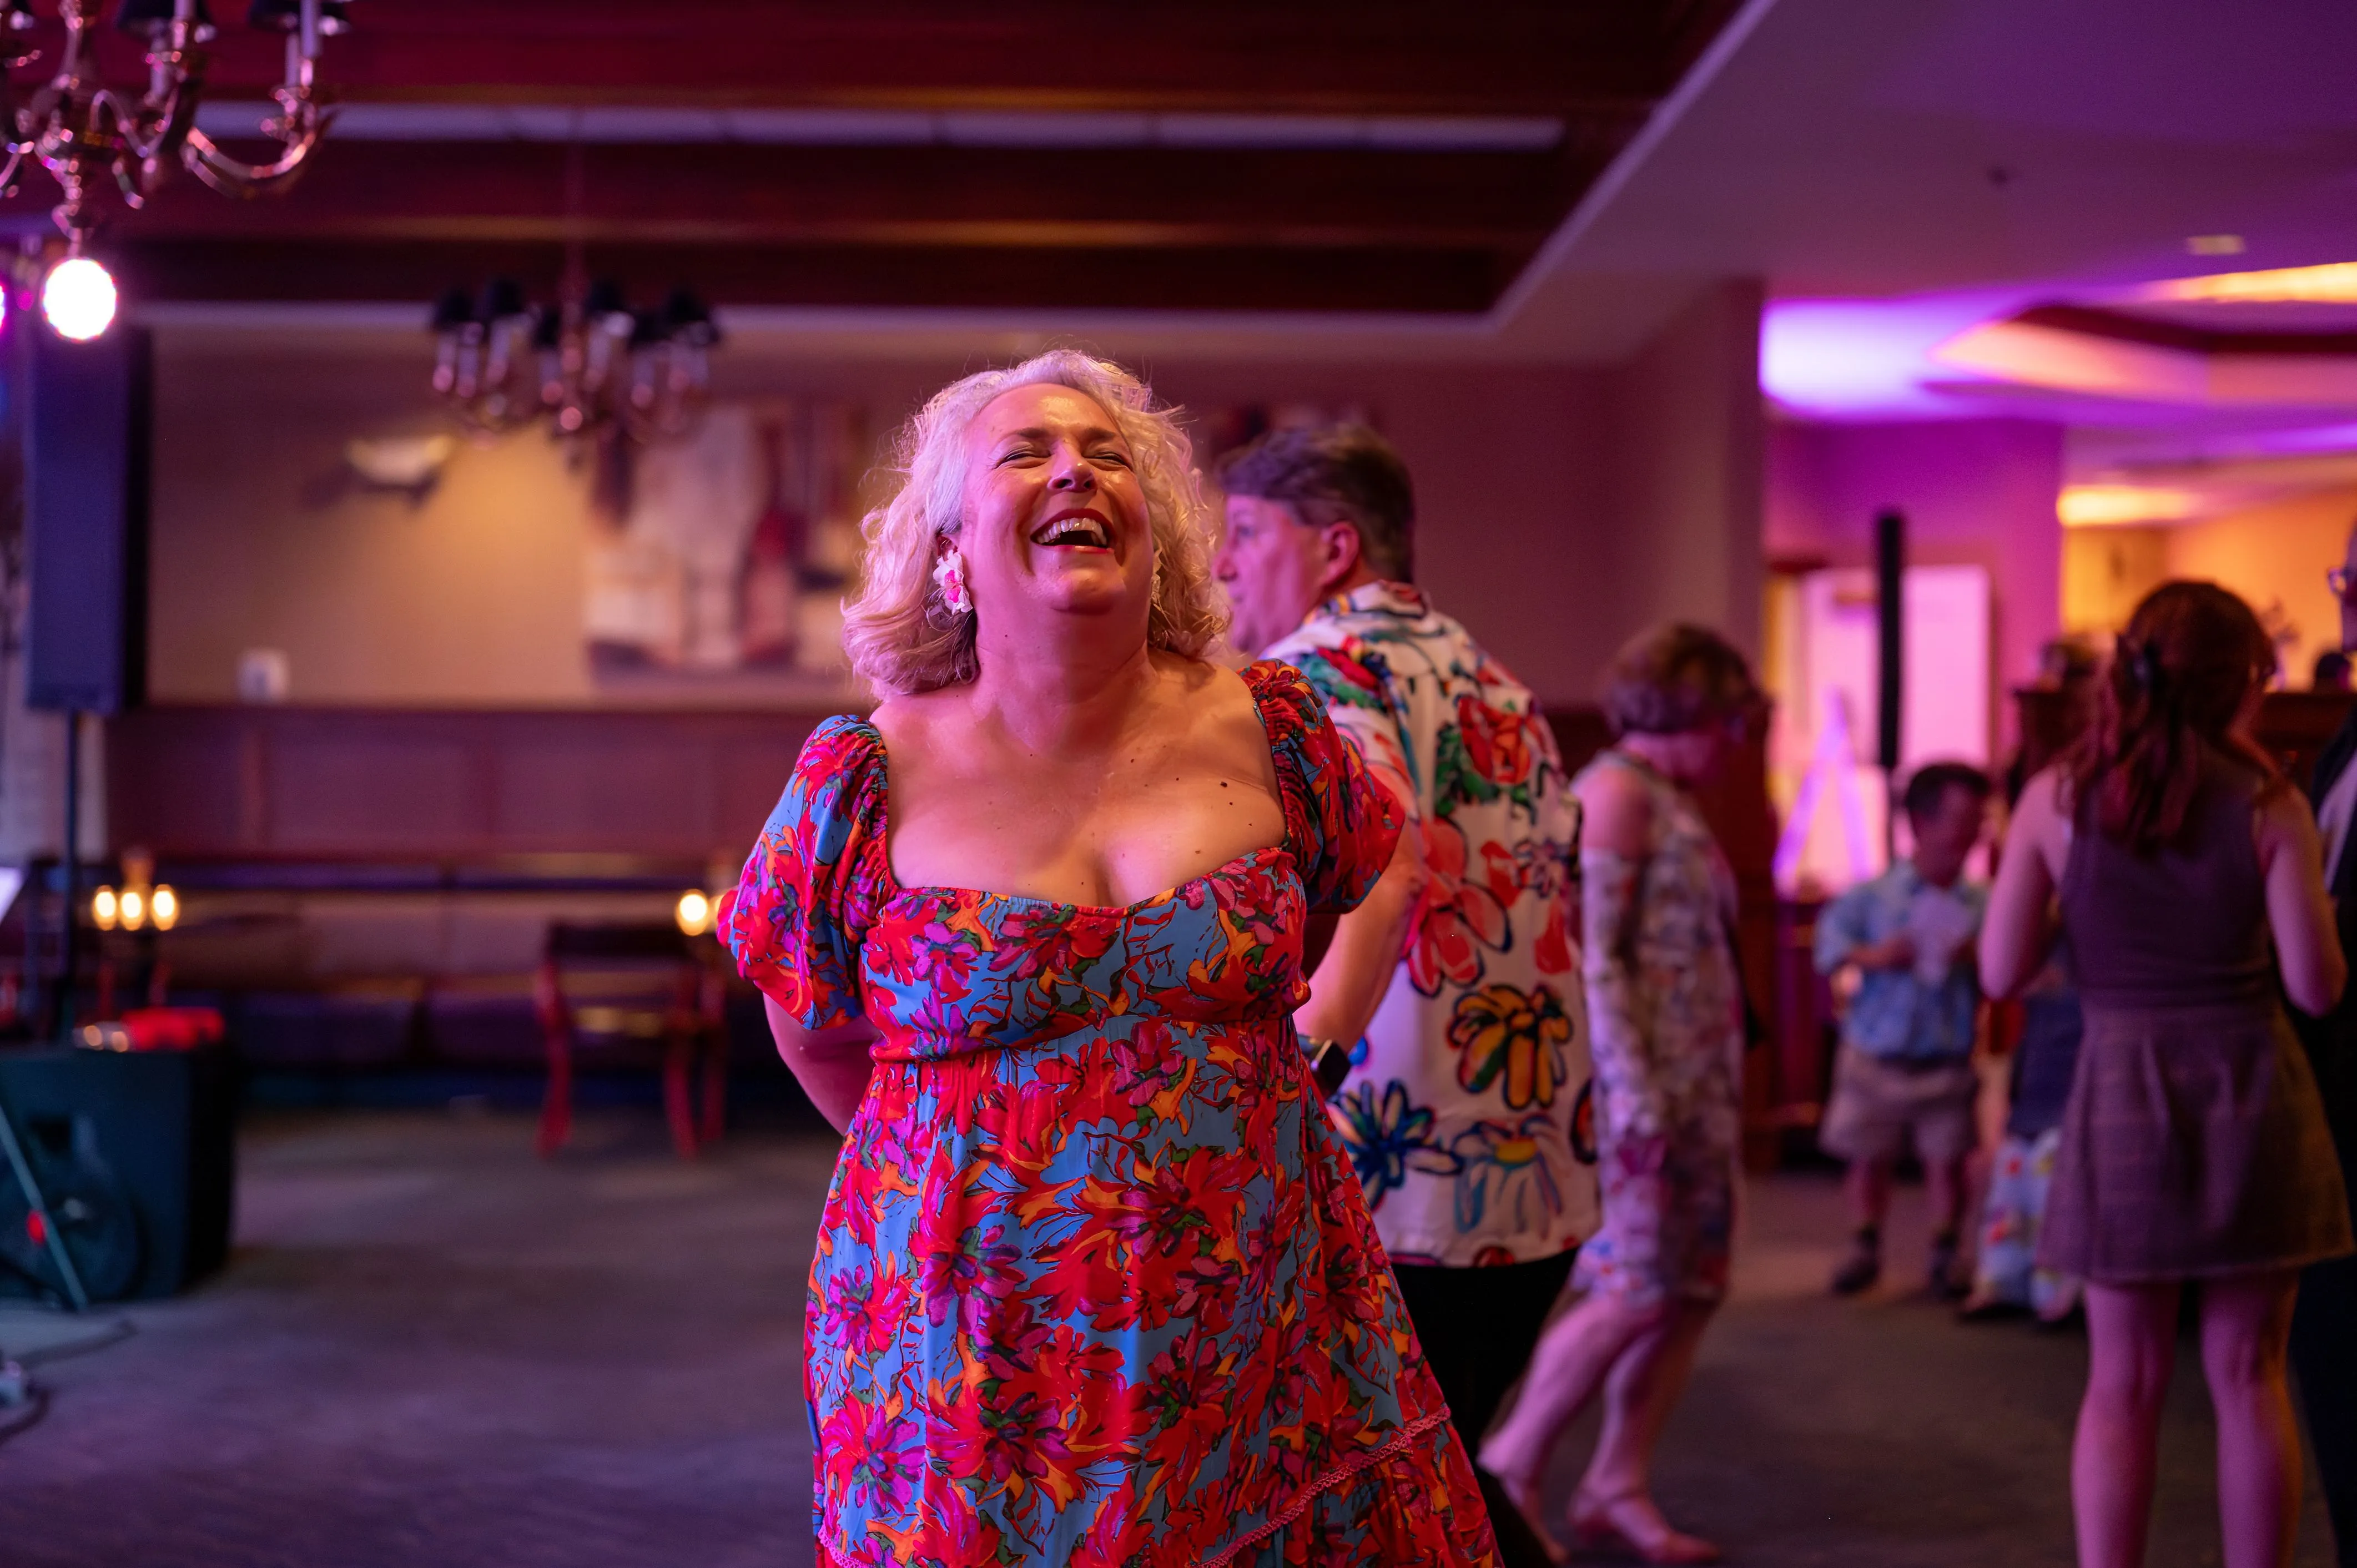 Joyful woman dancing at a party with other guests in the background.